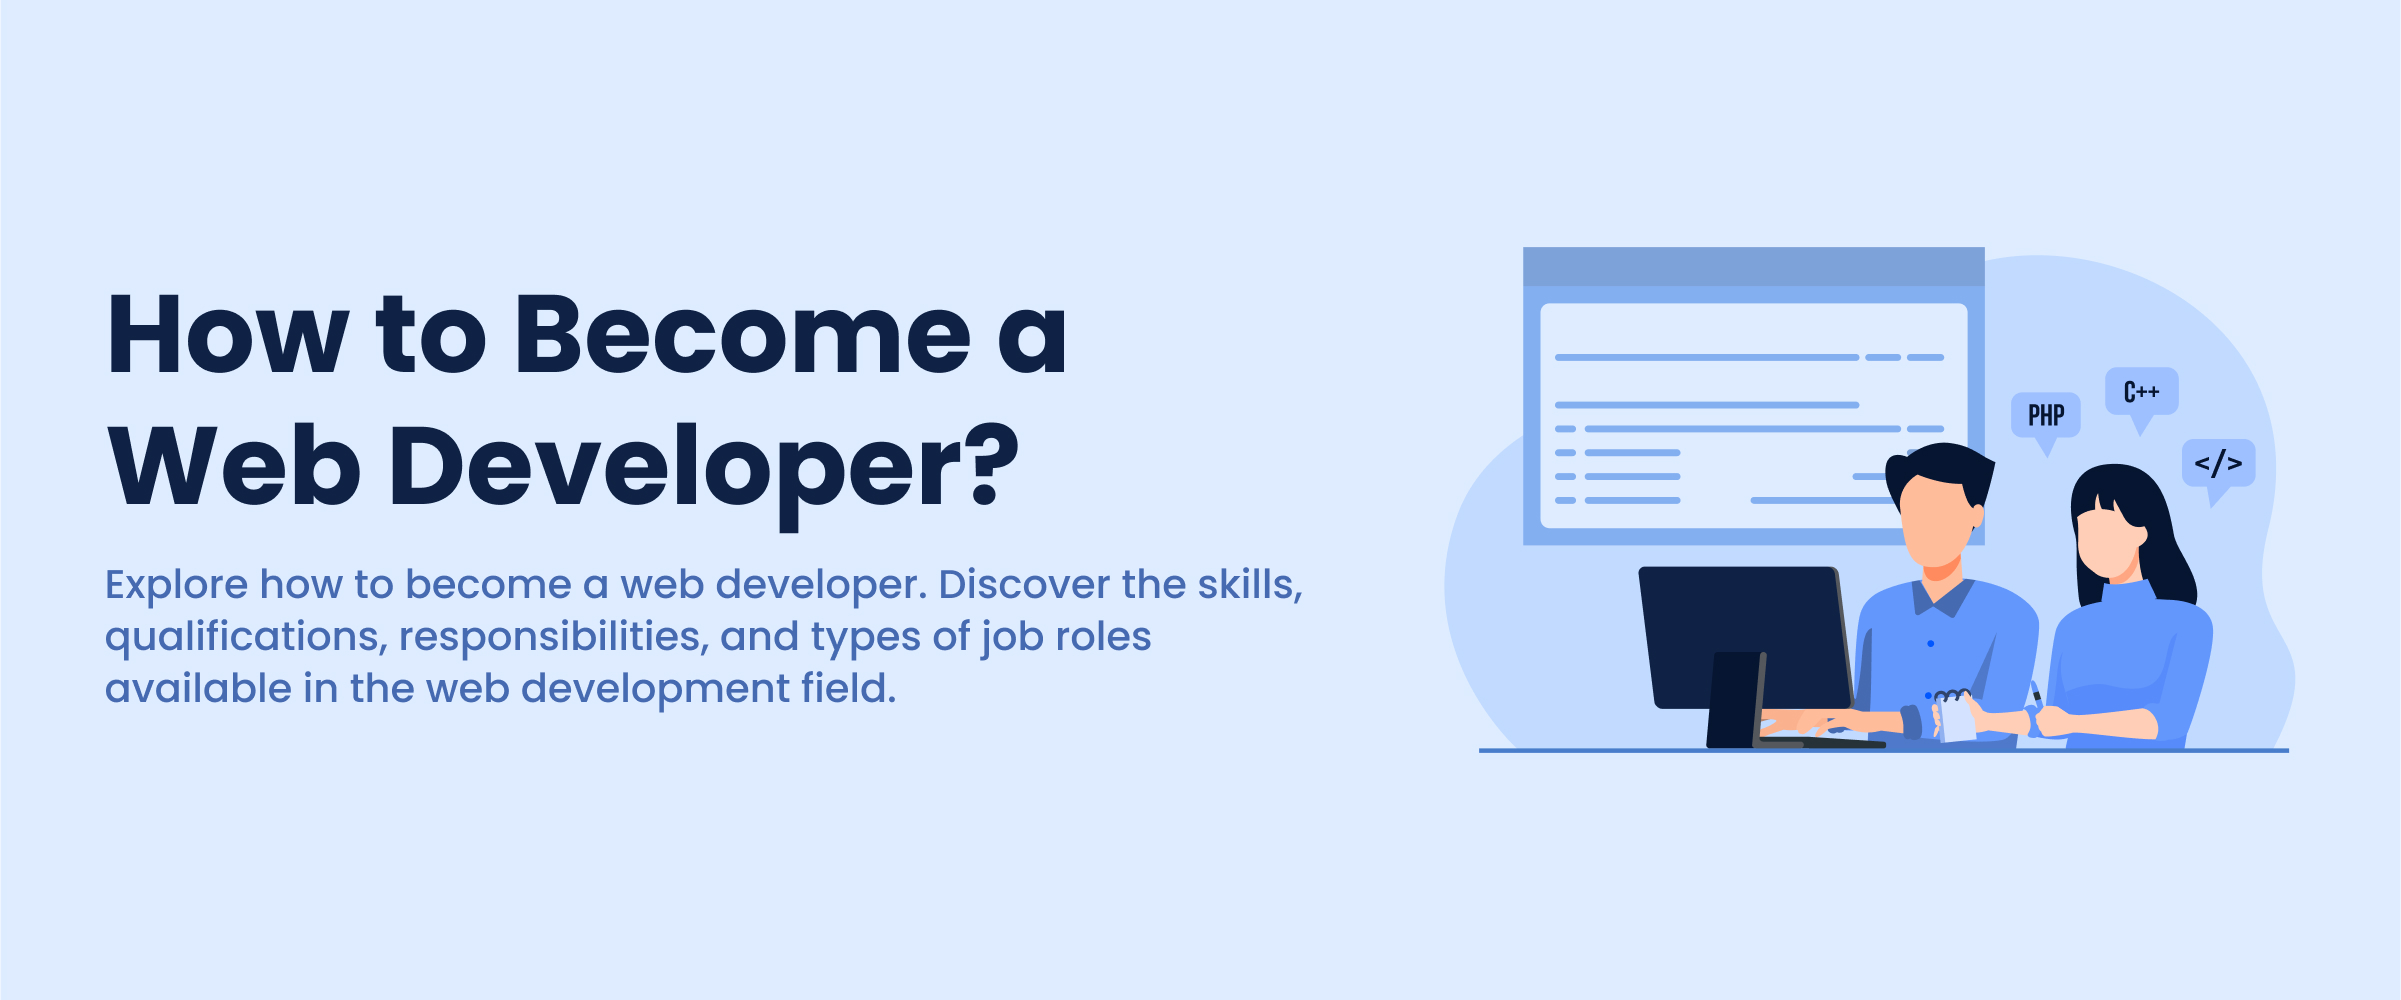 How to Become a Web Developer?